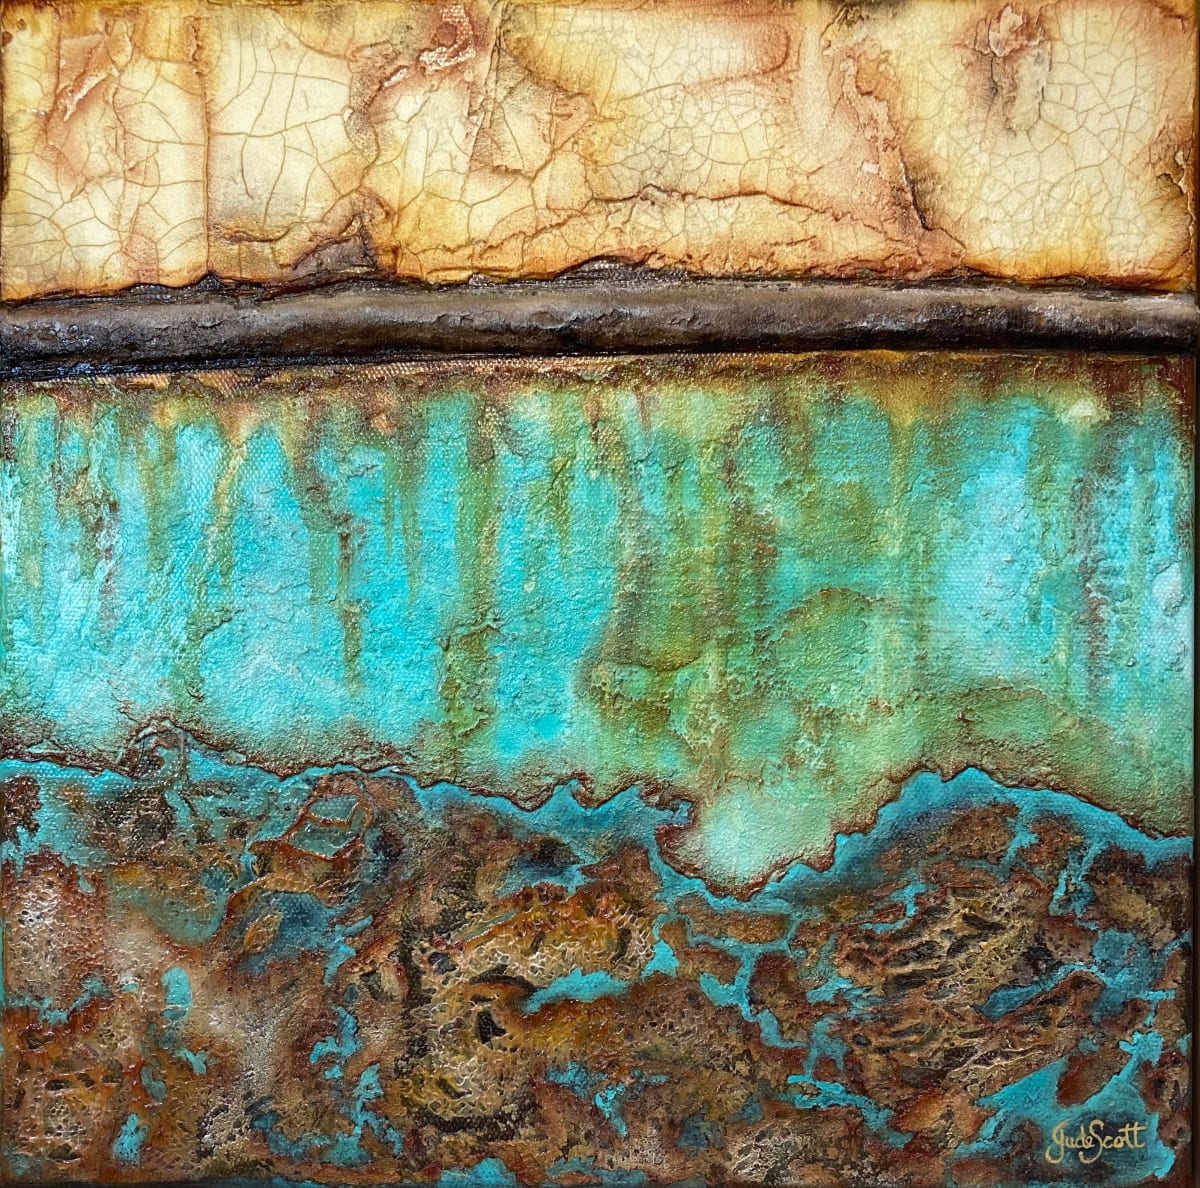 Rusty Hull 1 by Jude Scott  Image: On a recent road trip we stumbled upon an abandoned rusty old boat, high & dry and left to decay. The weather had taken its toll but I found the hull so beautiful with it's cracking paint, rusty patina & turquoise to orange/red colours, inspiring me to recreate this interpretation.







